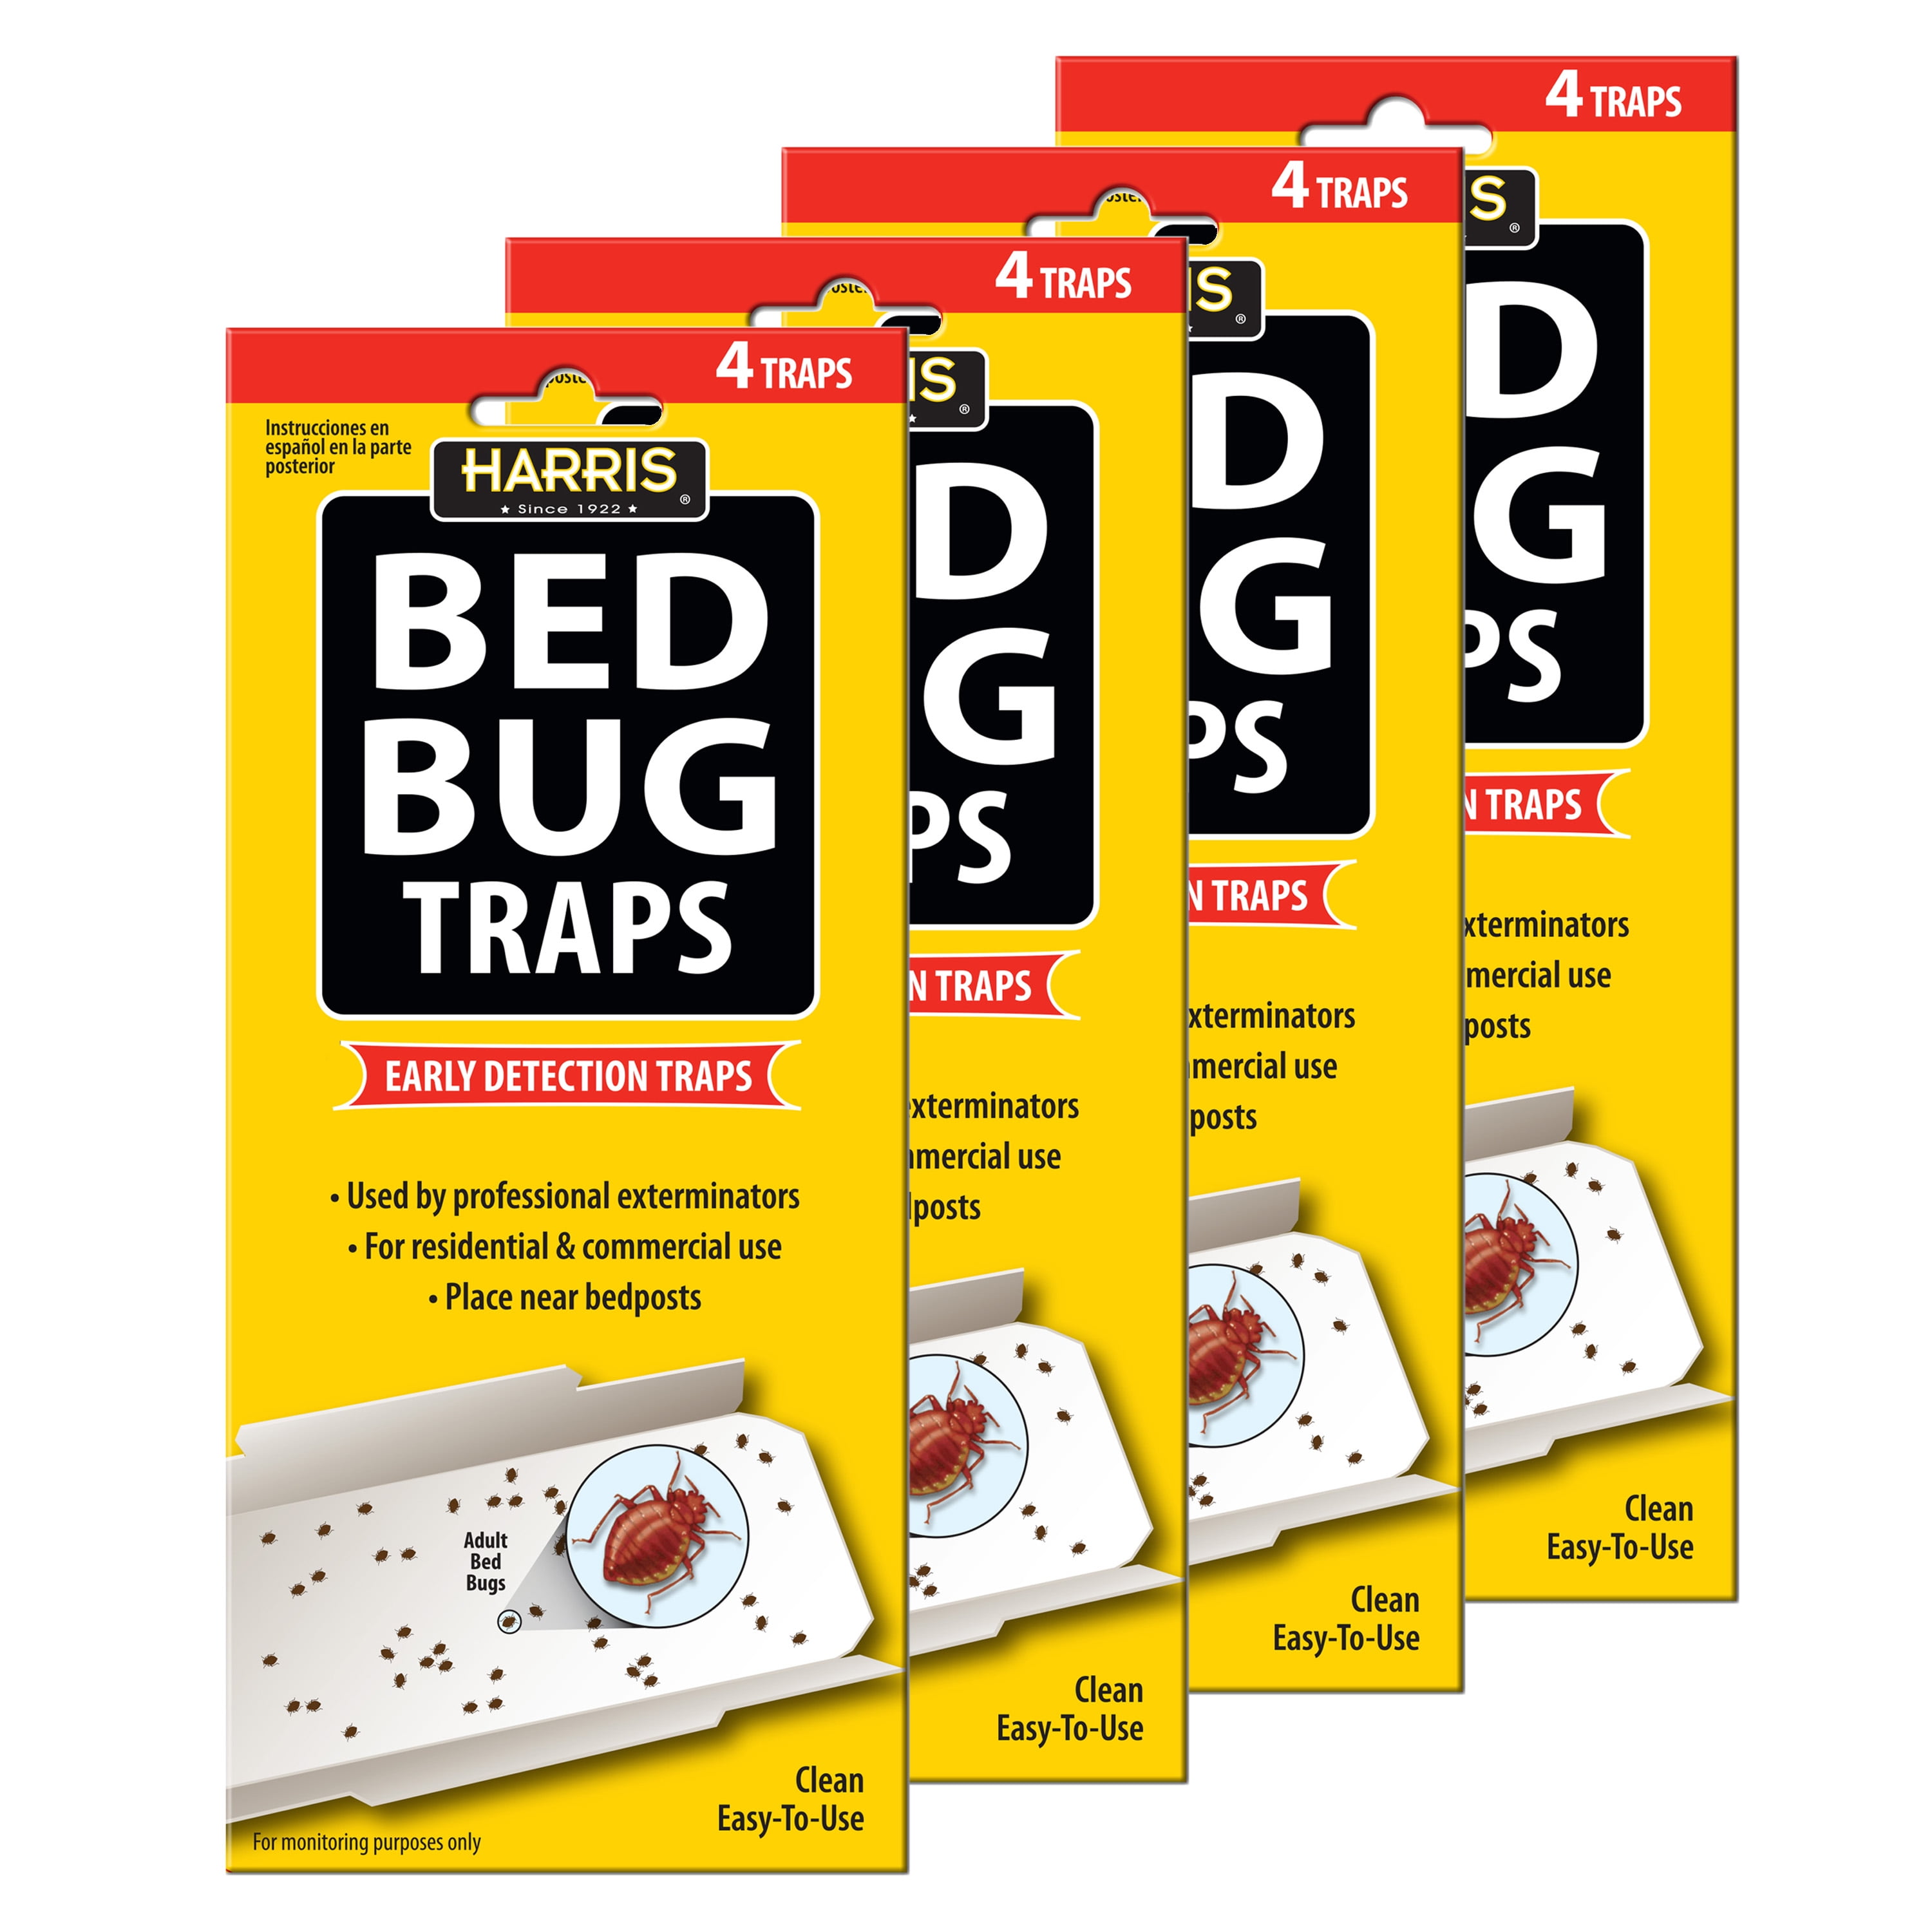 Harris Bed Bug Traps 4 Pack Low Profile Design 16 Traps Total